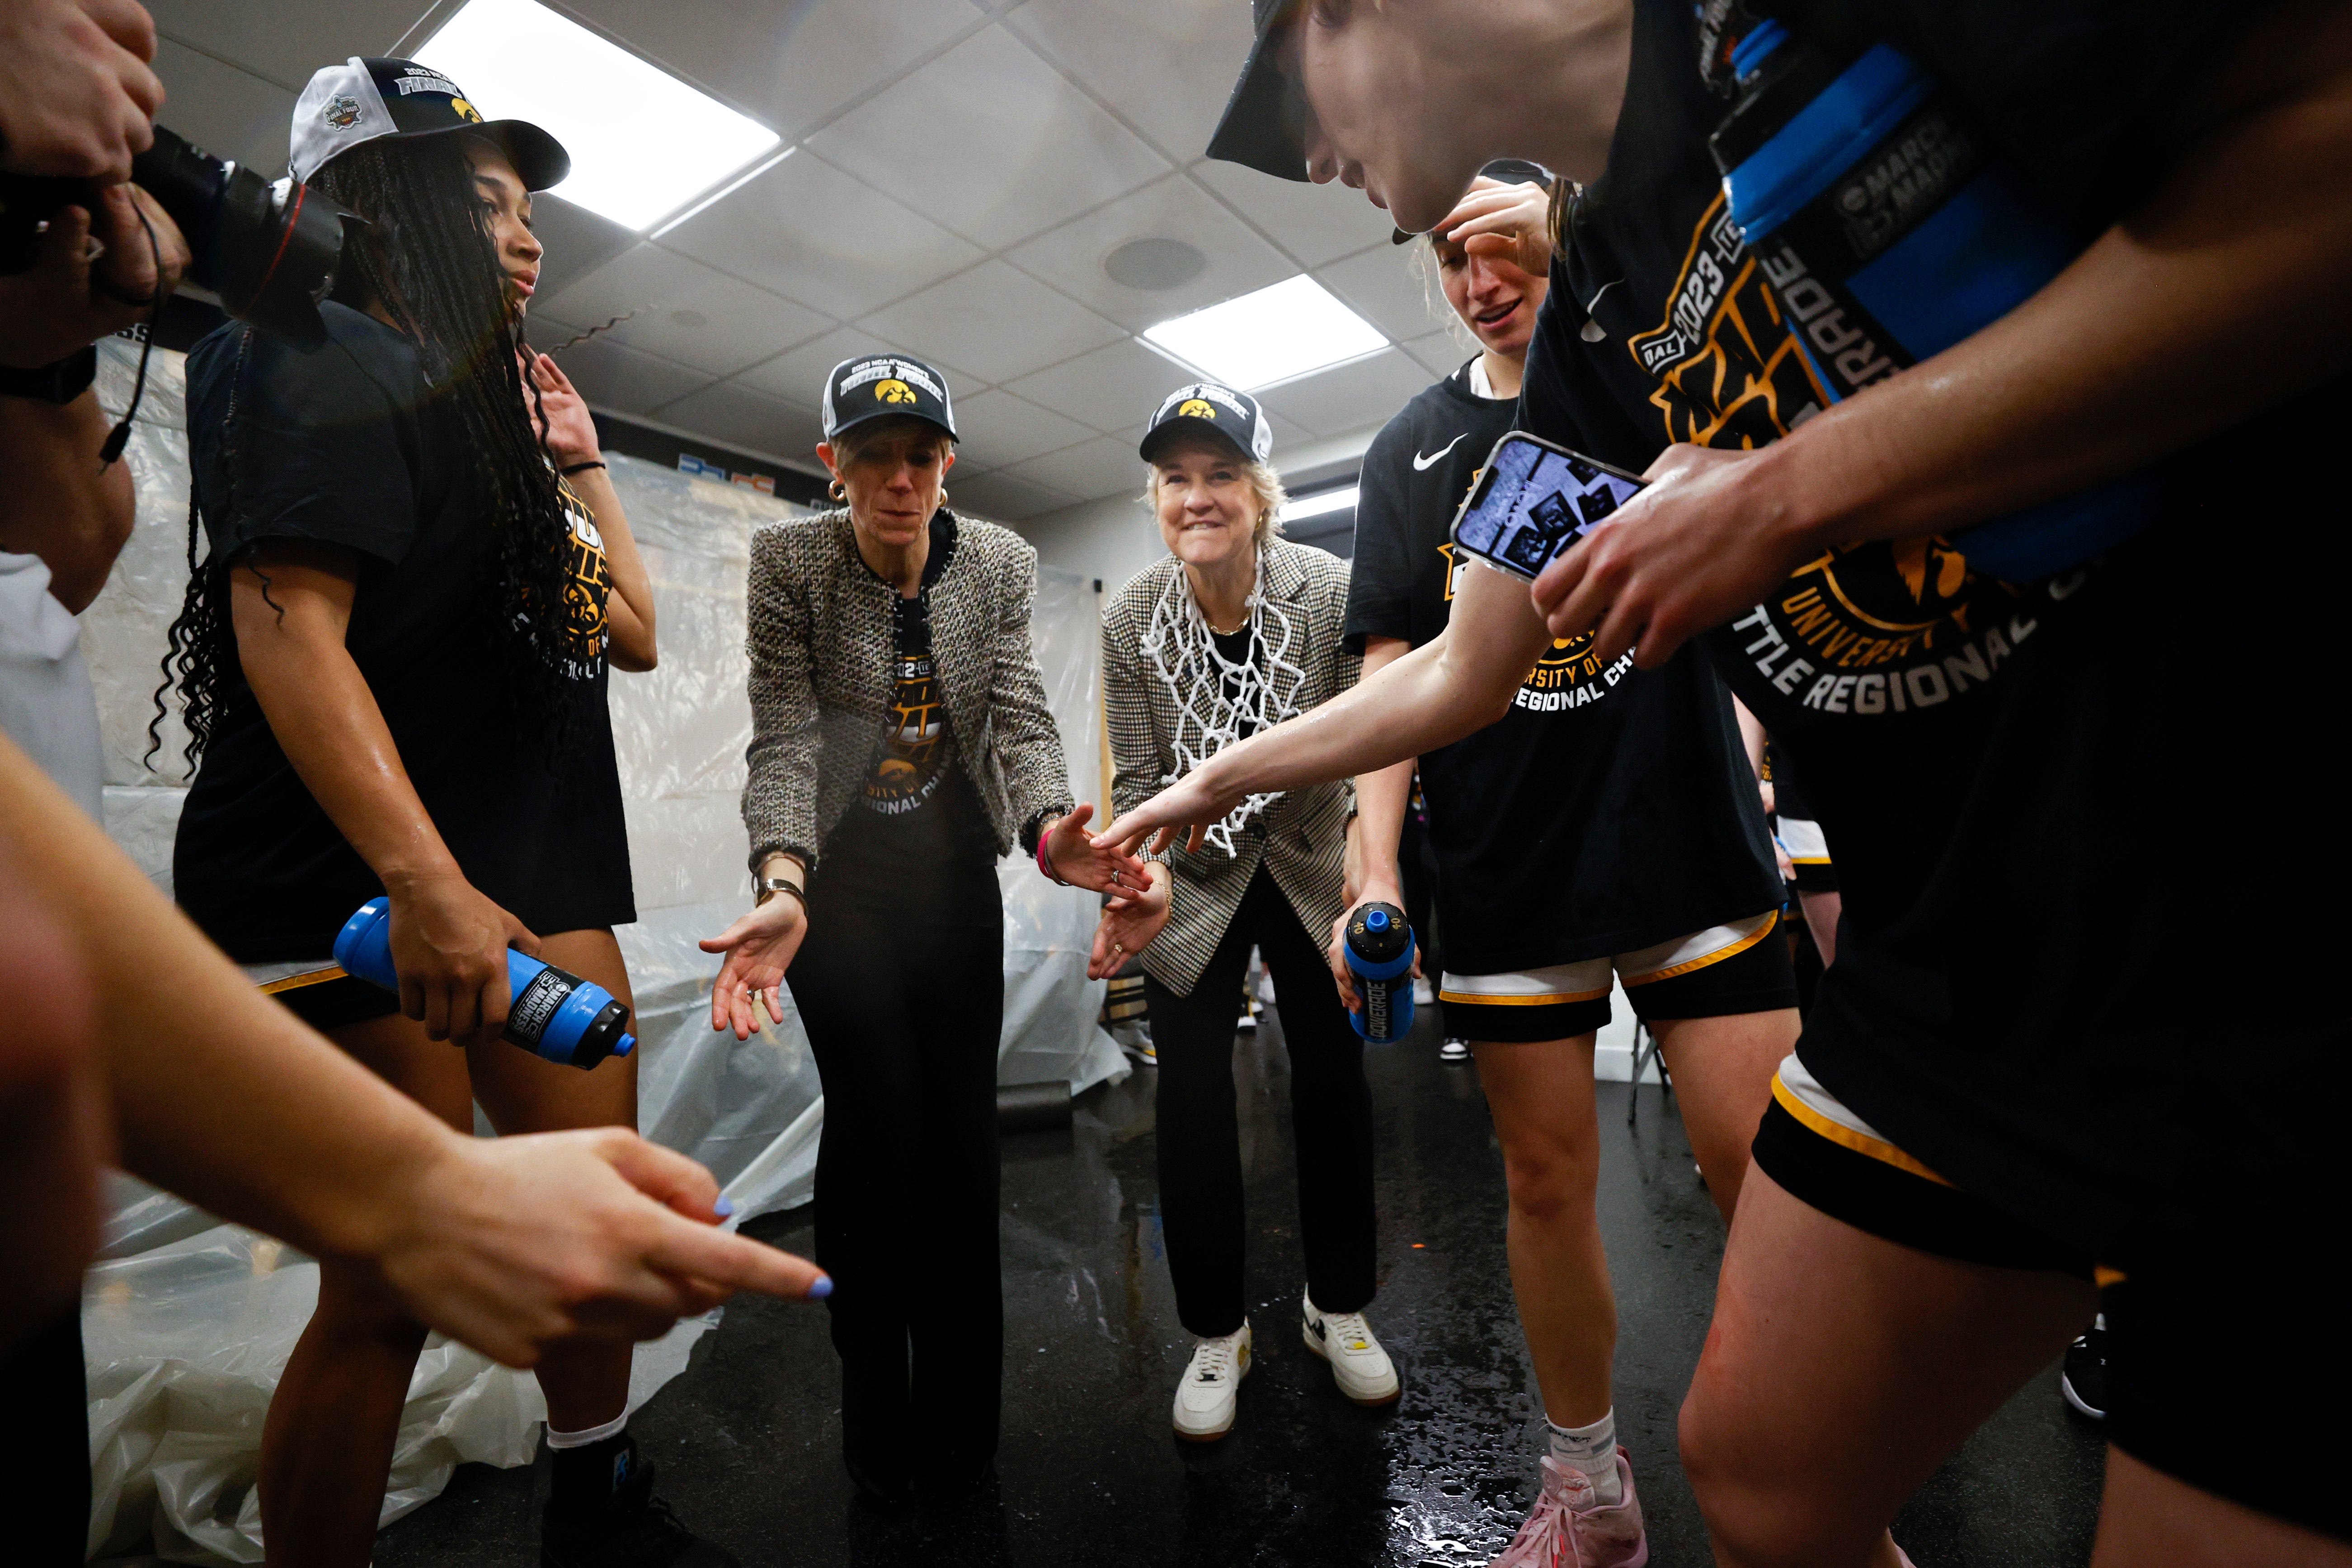 Iowa associate head coach Jan Jensen and head coach Lisa Bluder celebrate with players in the locker room after defeating the Louisville Cardinals 97-83 in the Elite Eight round of the NCAA Women's Basketball Tournament, March 26, 2023, at Climate Pledge Arena in Seattle.